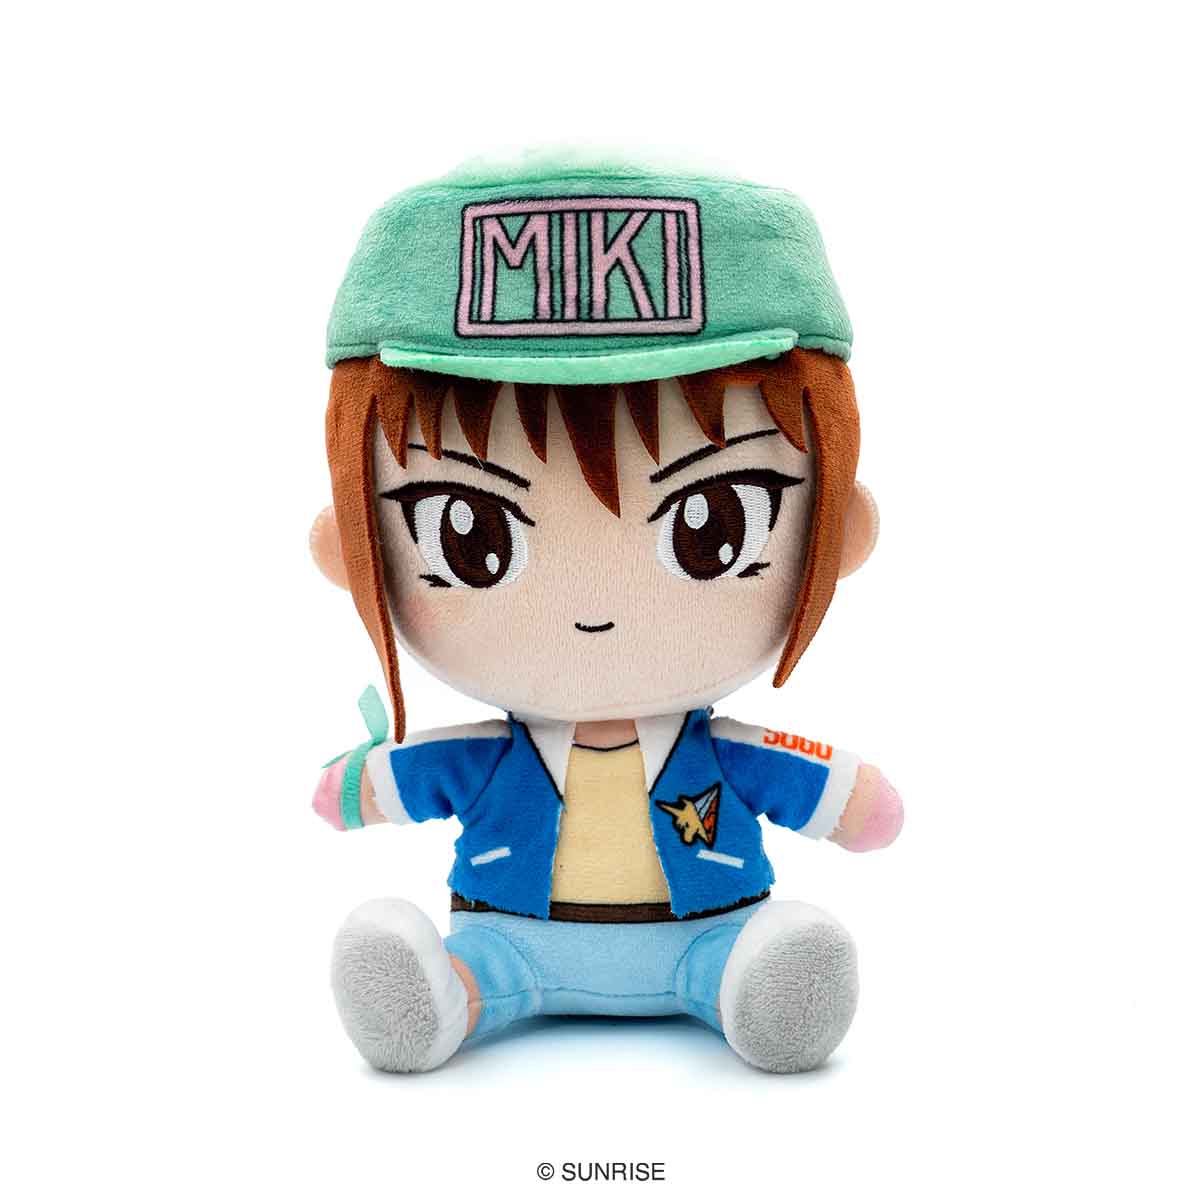 The King of Fighters '98 plush series is now available on IIJAN!